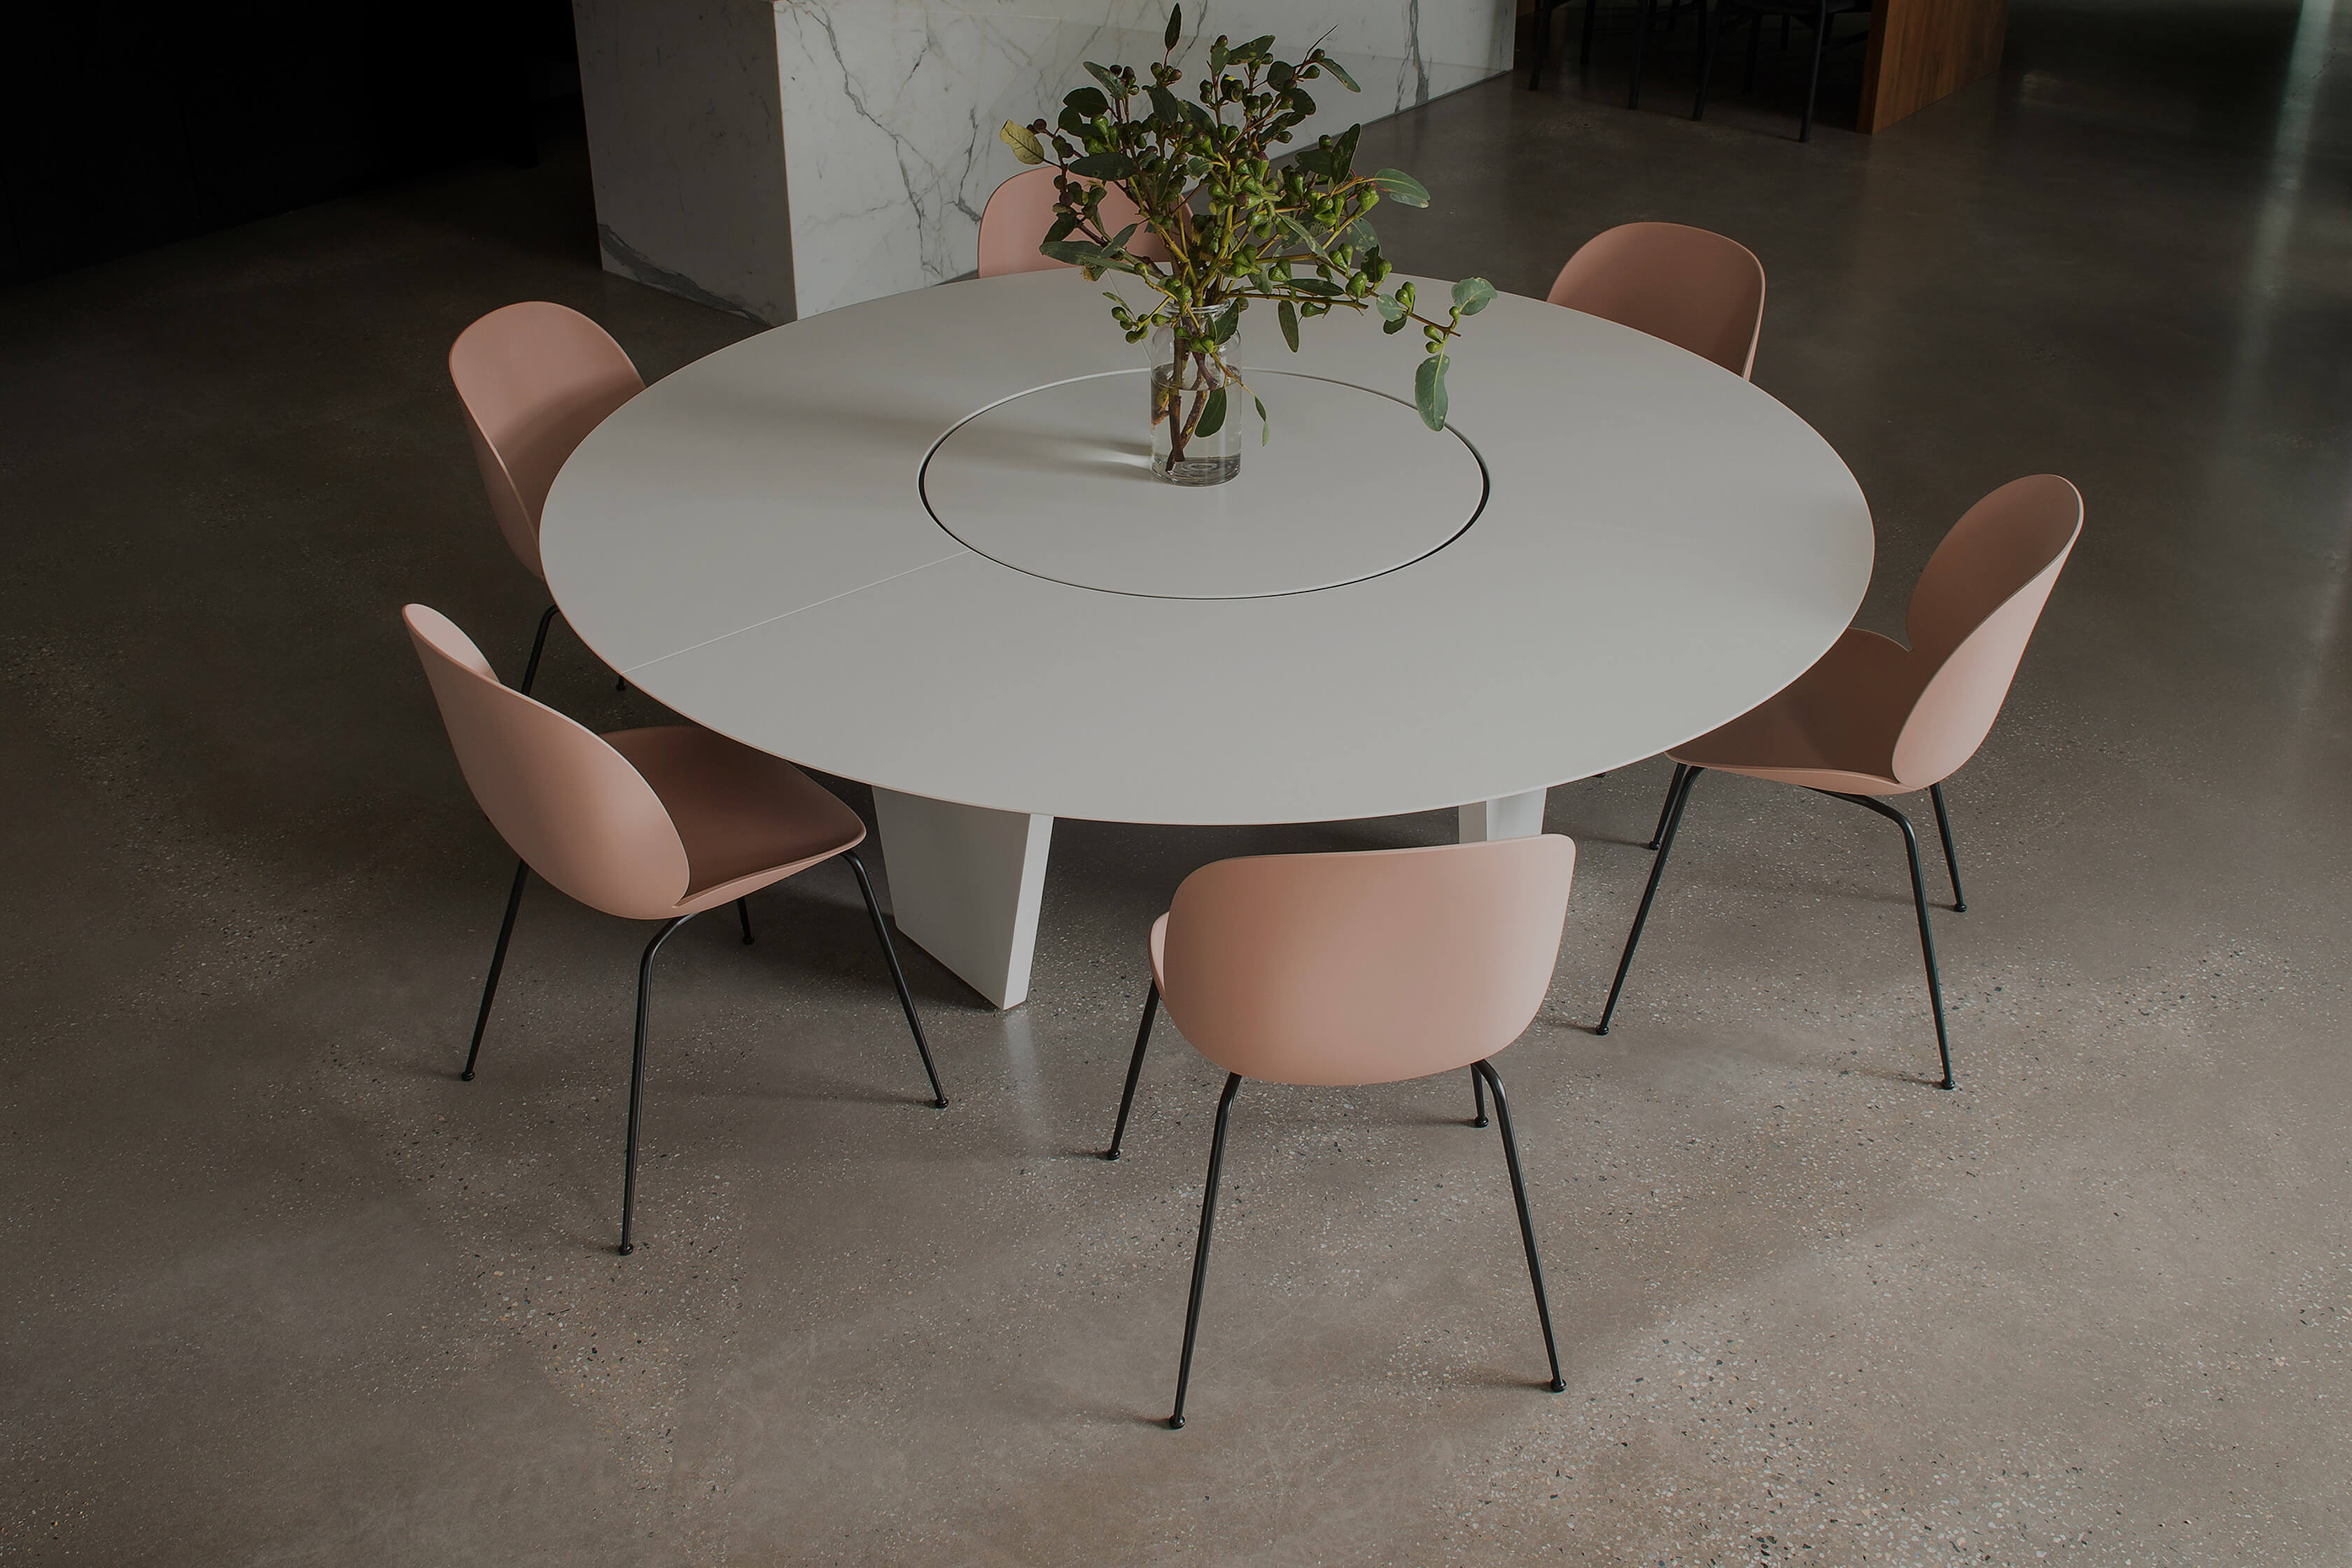 You feel a sense of inclusiveness in this architectural family home when you gather around the round designer table by Australian designer FrancoCrea